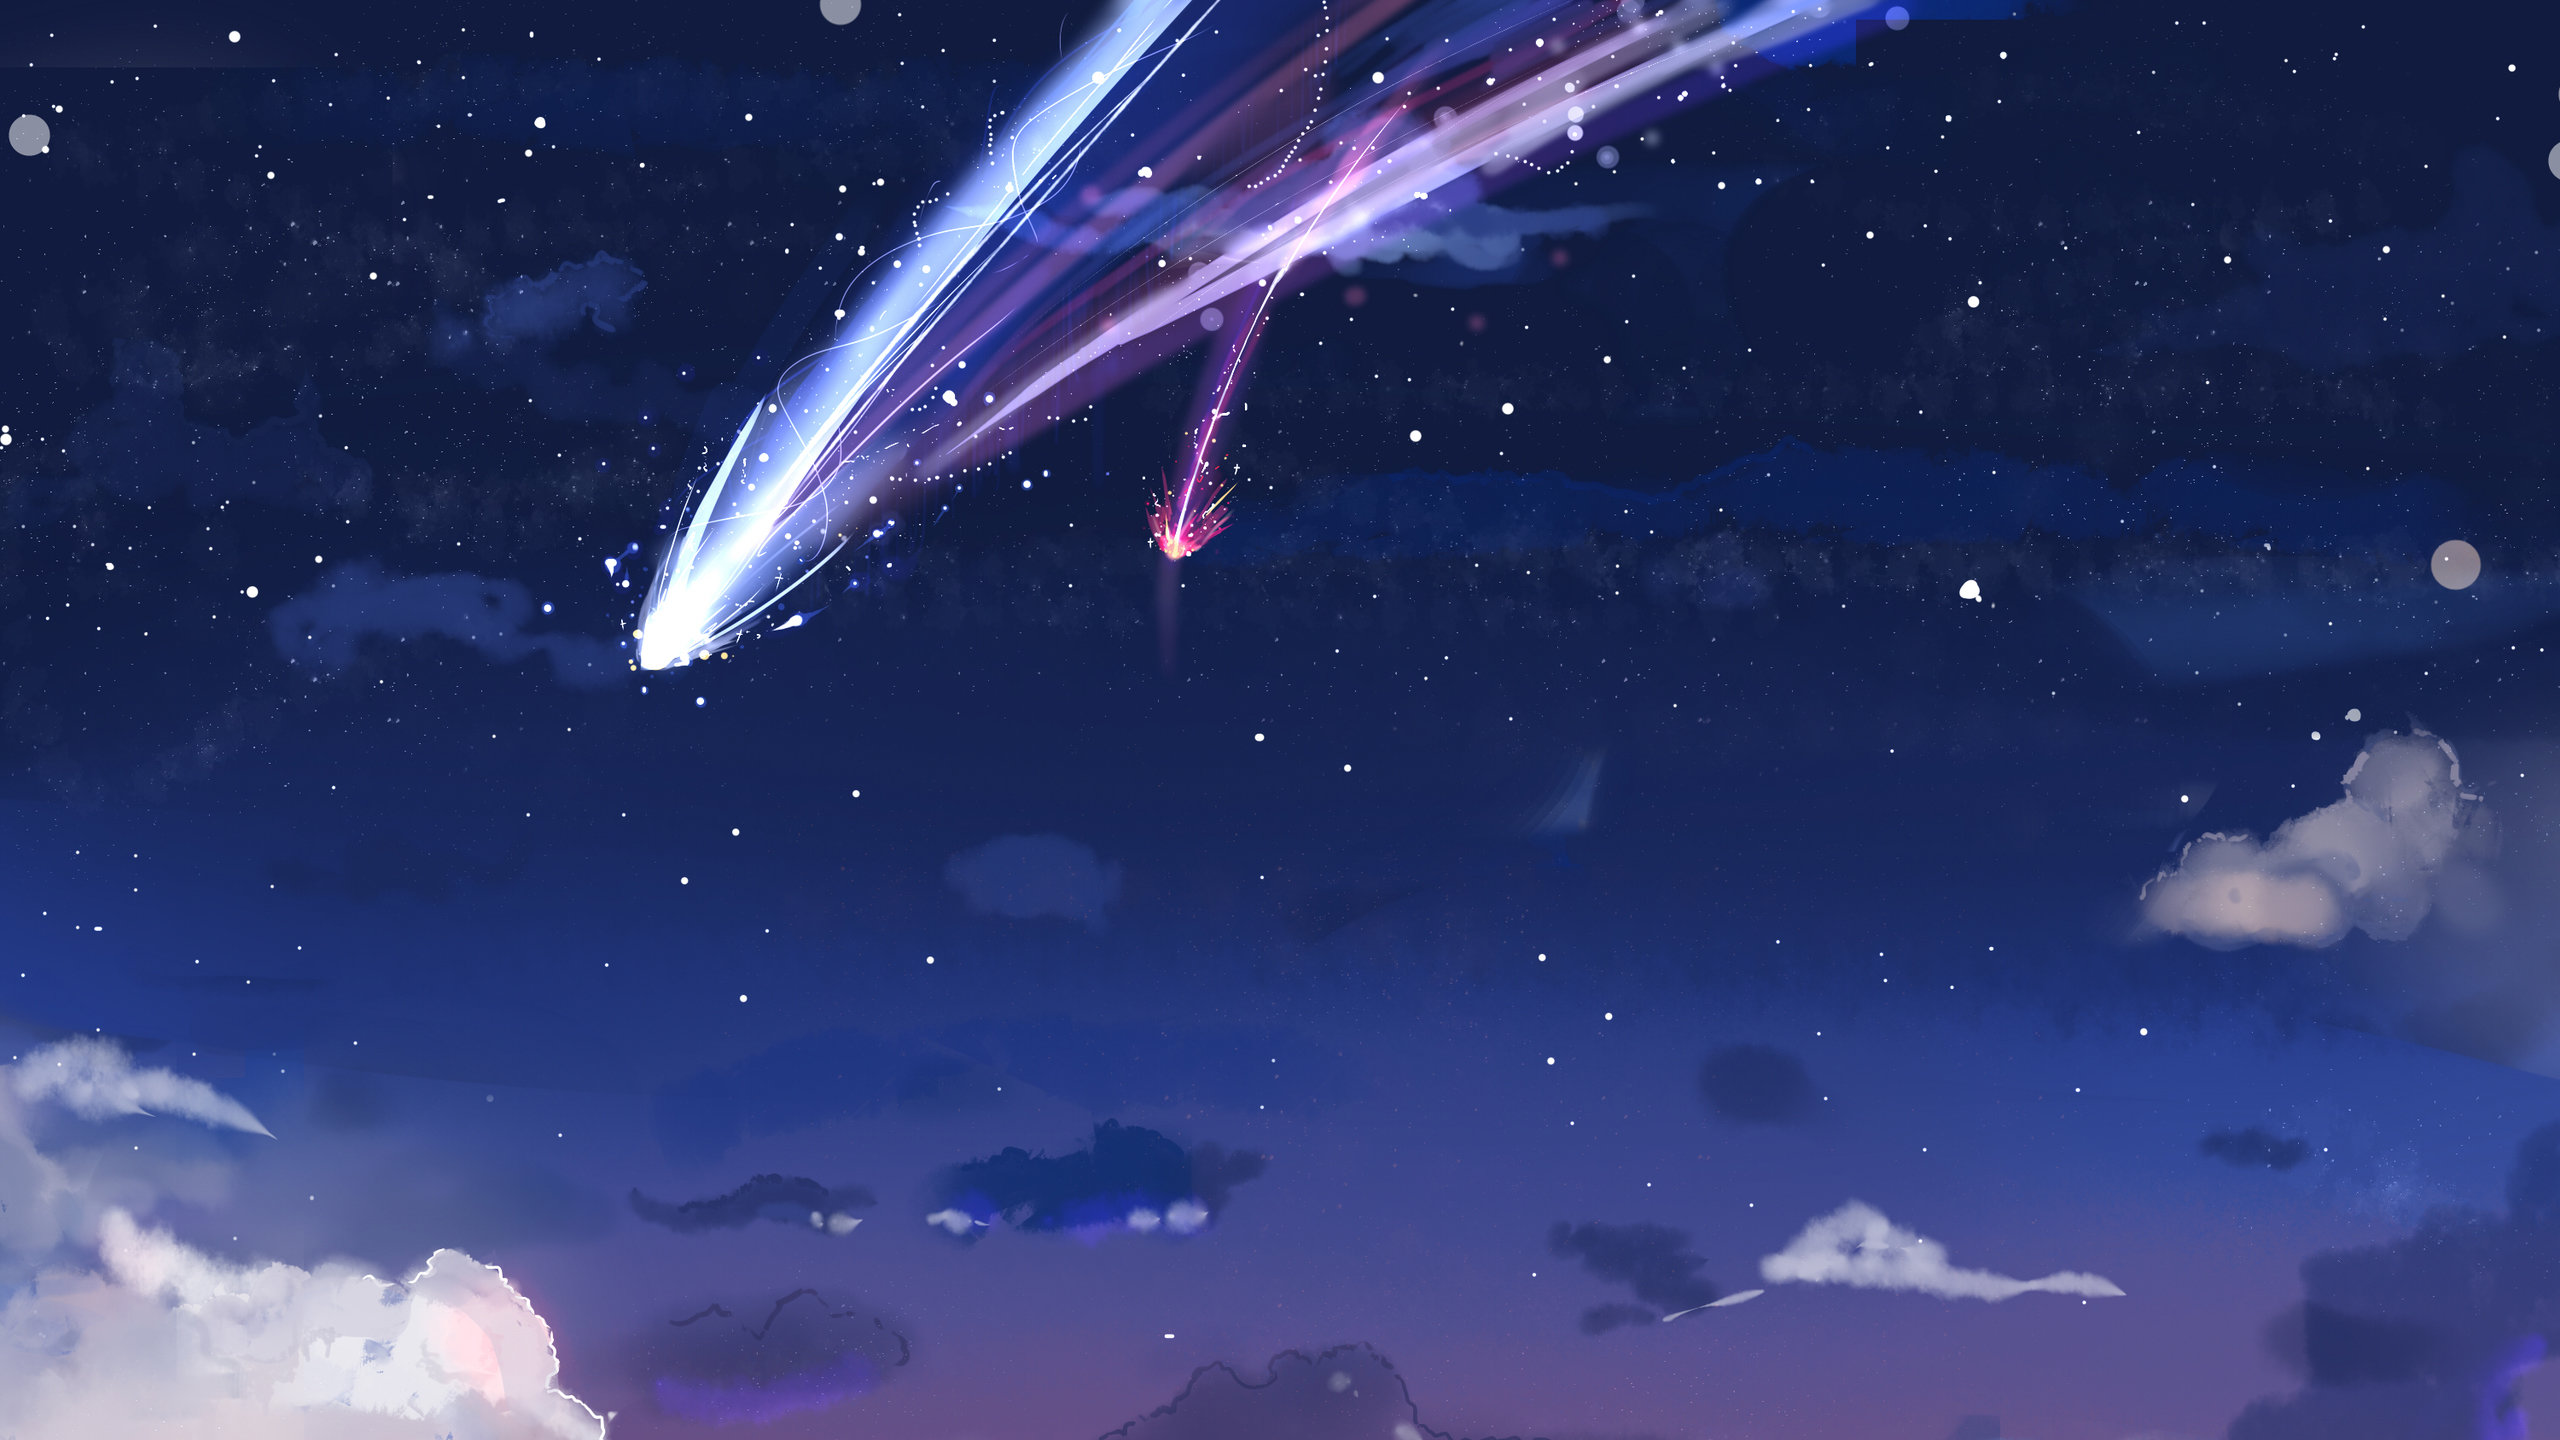  Your  Name  wallpapers  2560x1440 desktop backgrounds 